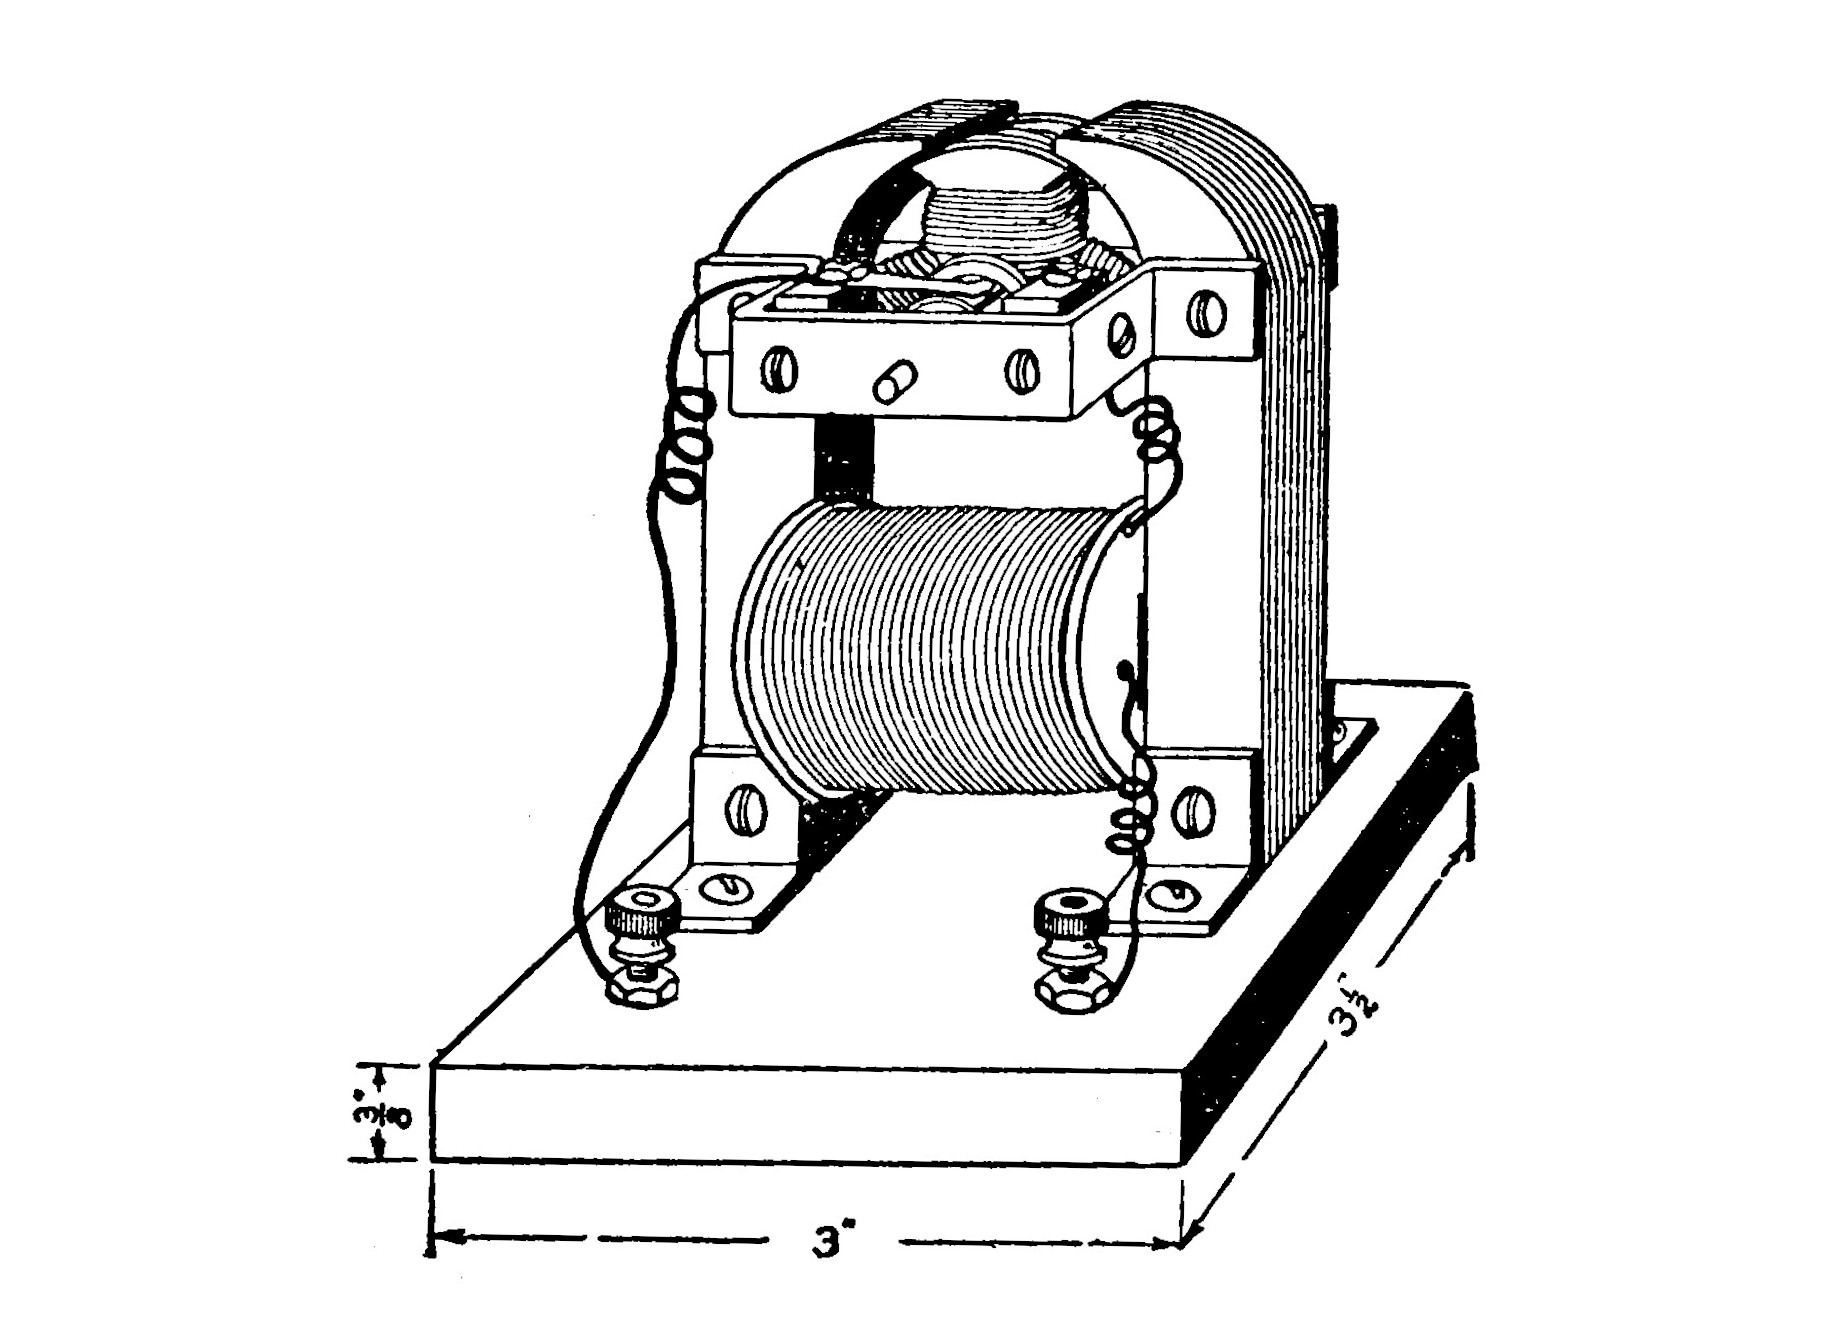 FIG. 40.—The completed Electric Motor.